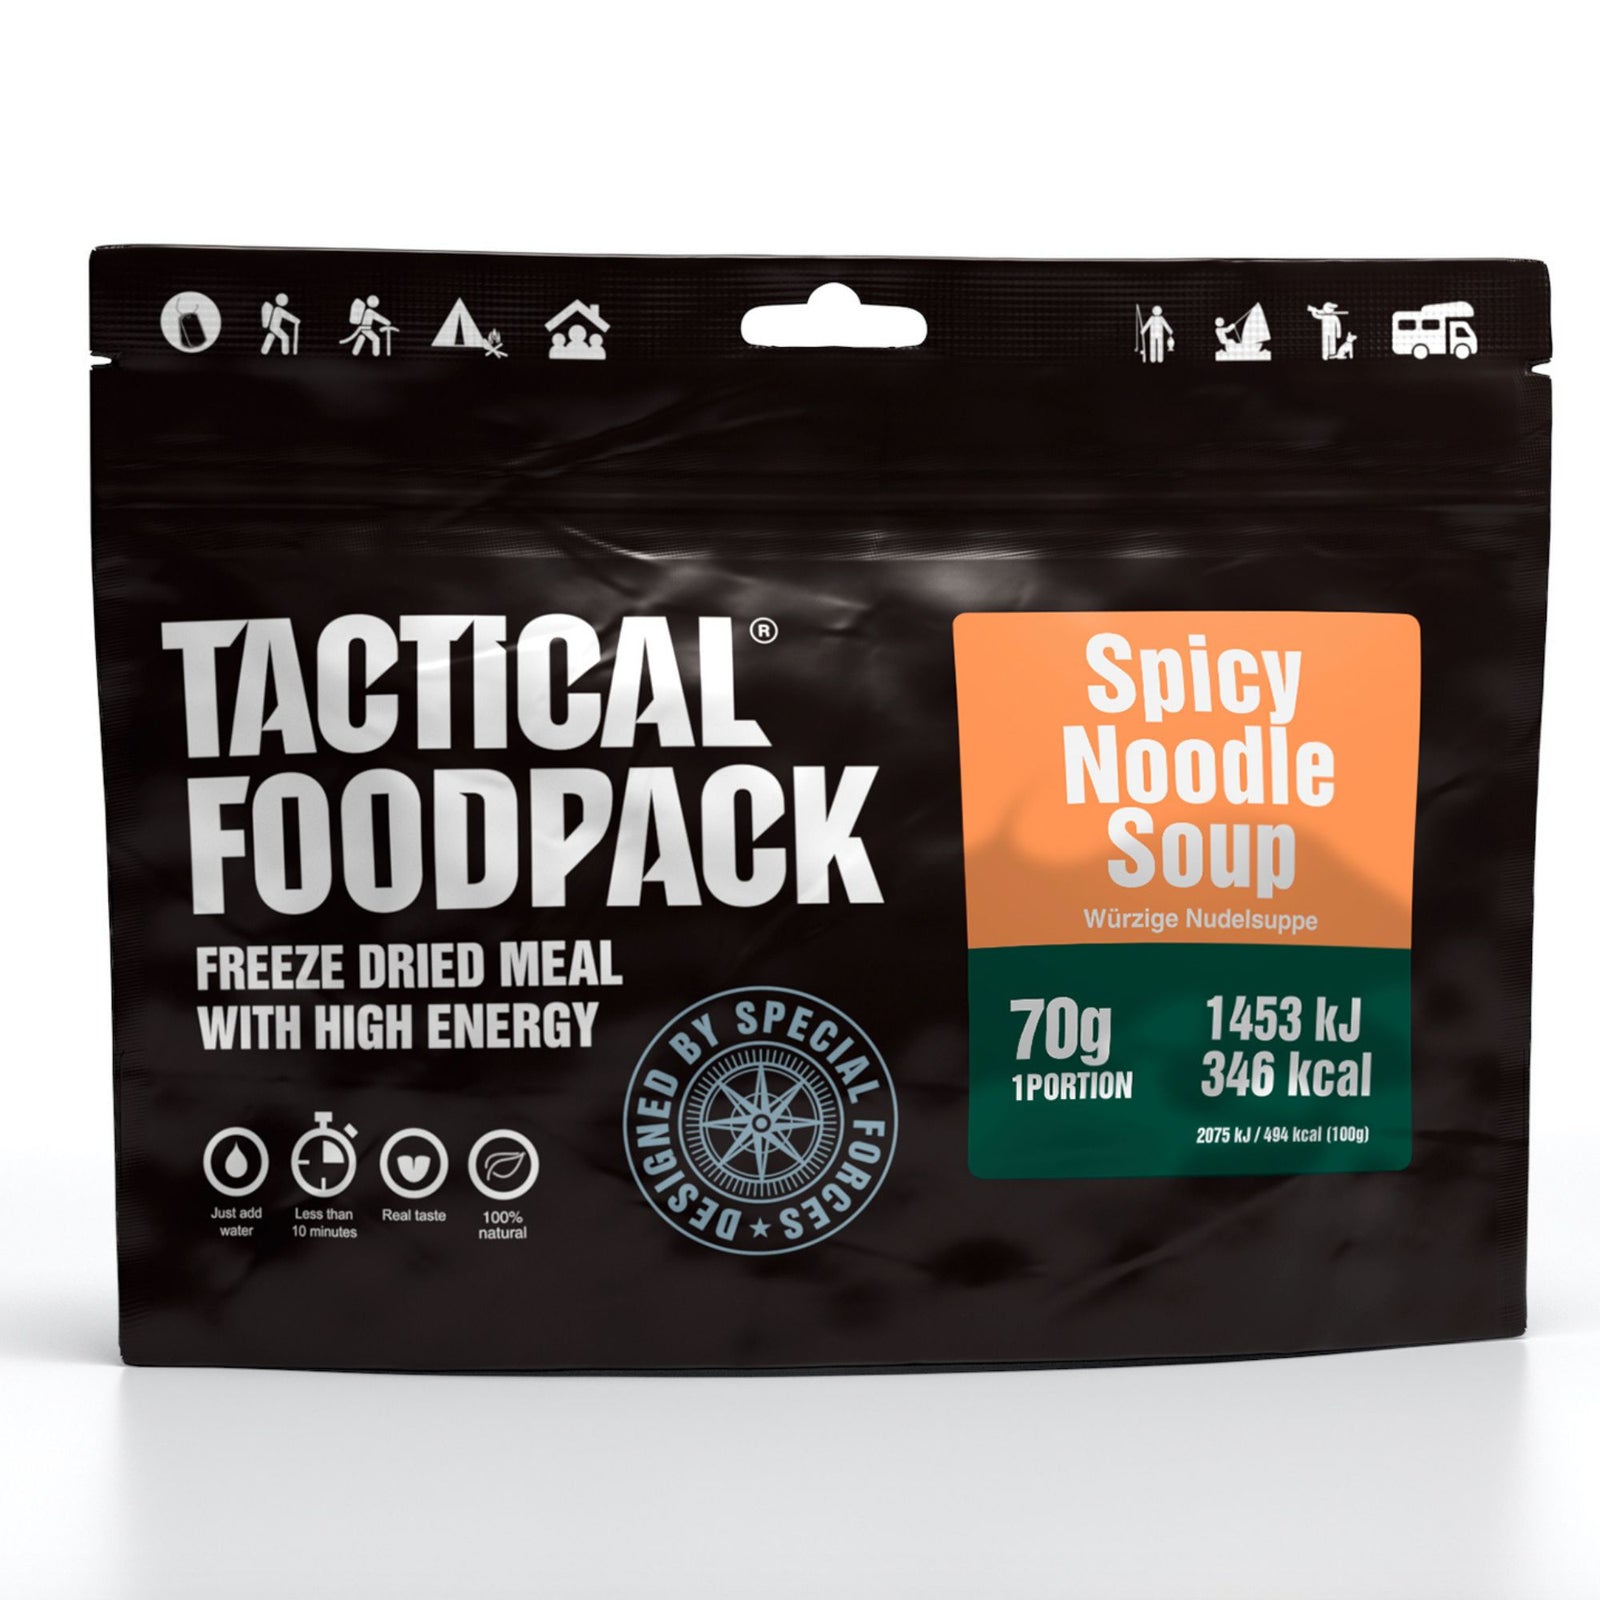 Tactical Foodpack | Spicy Noodle Soup 70g - Zuppa di noodles piccanti